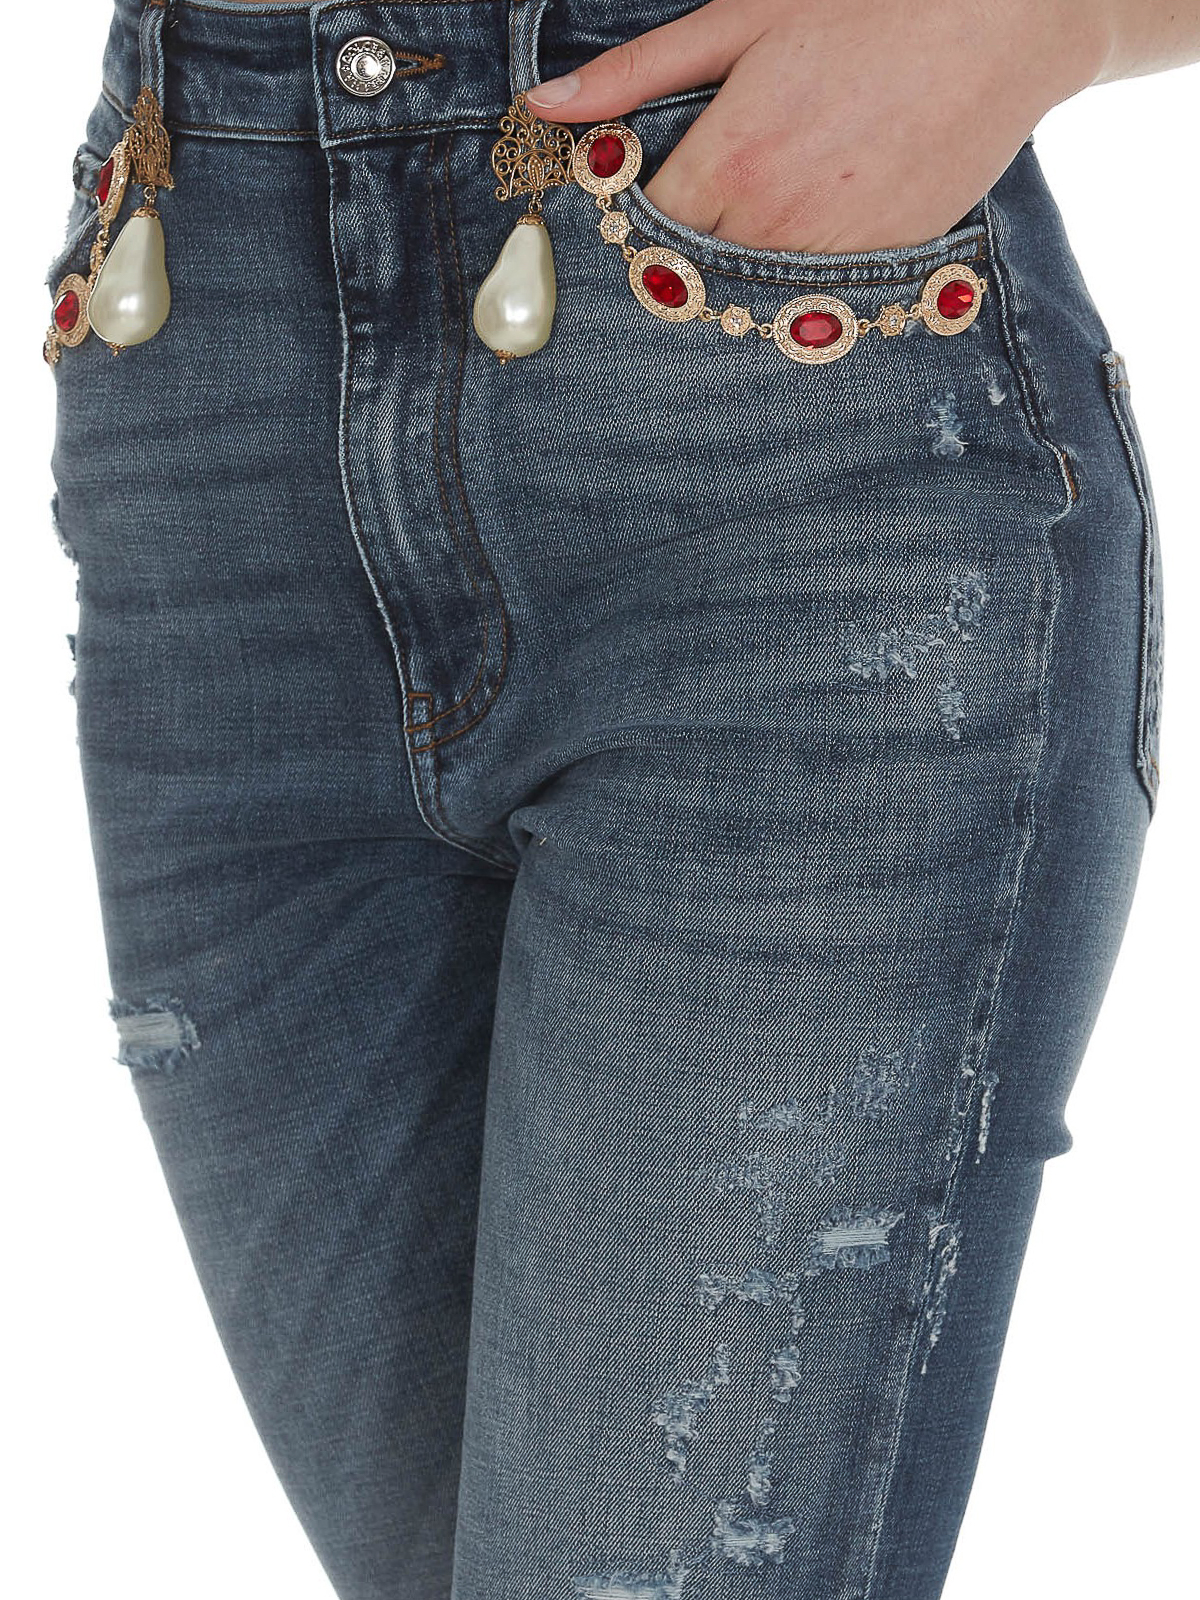 dolce and gabbana embellished jeans